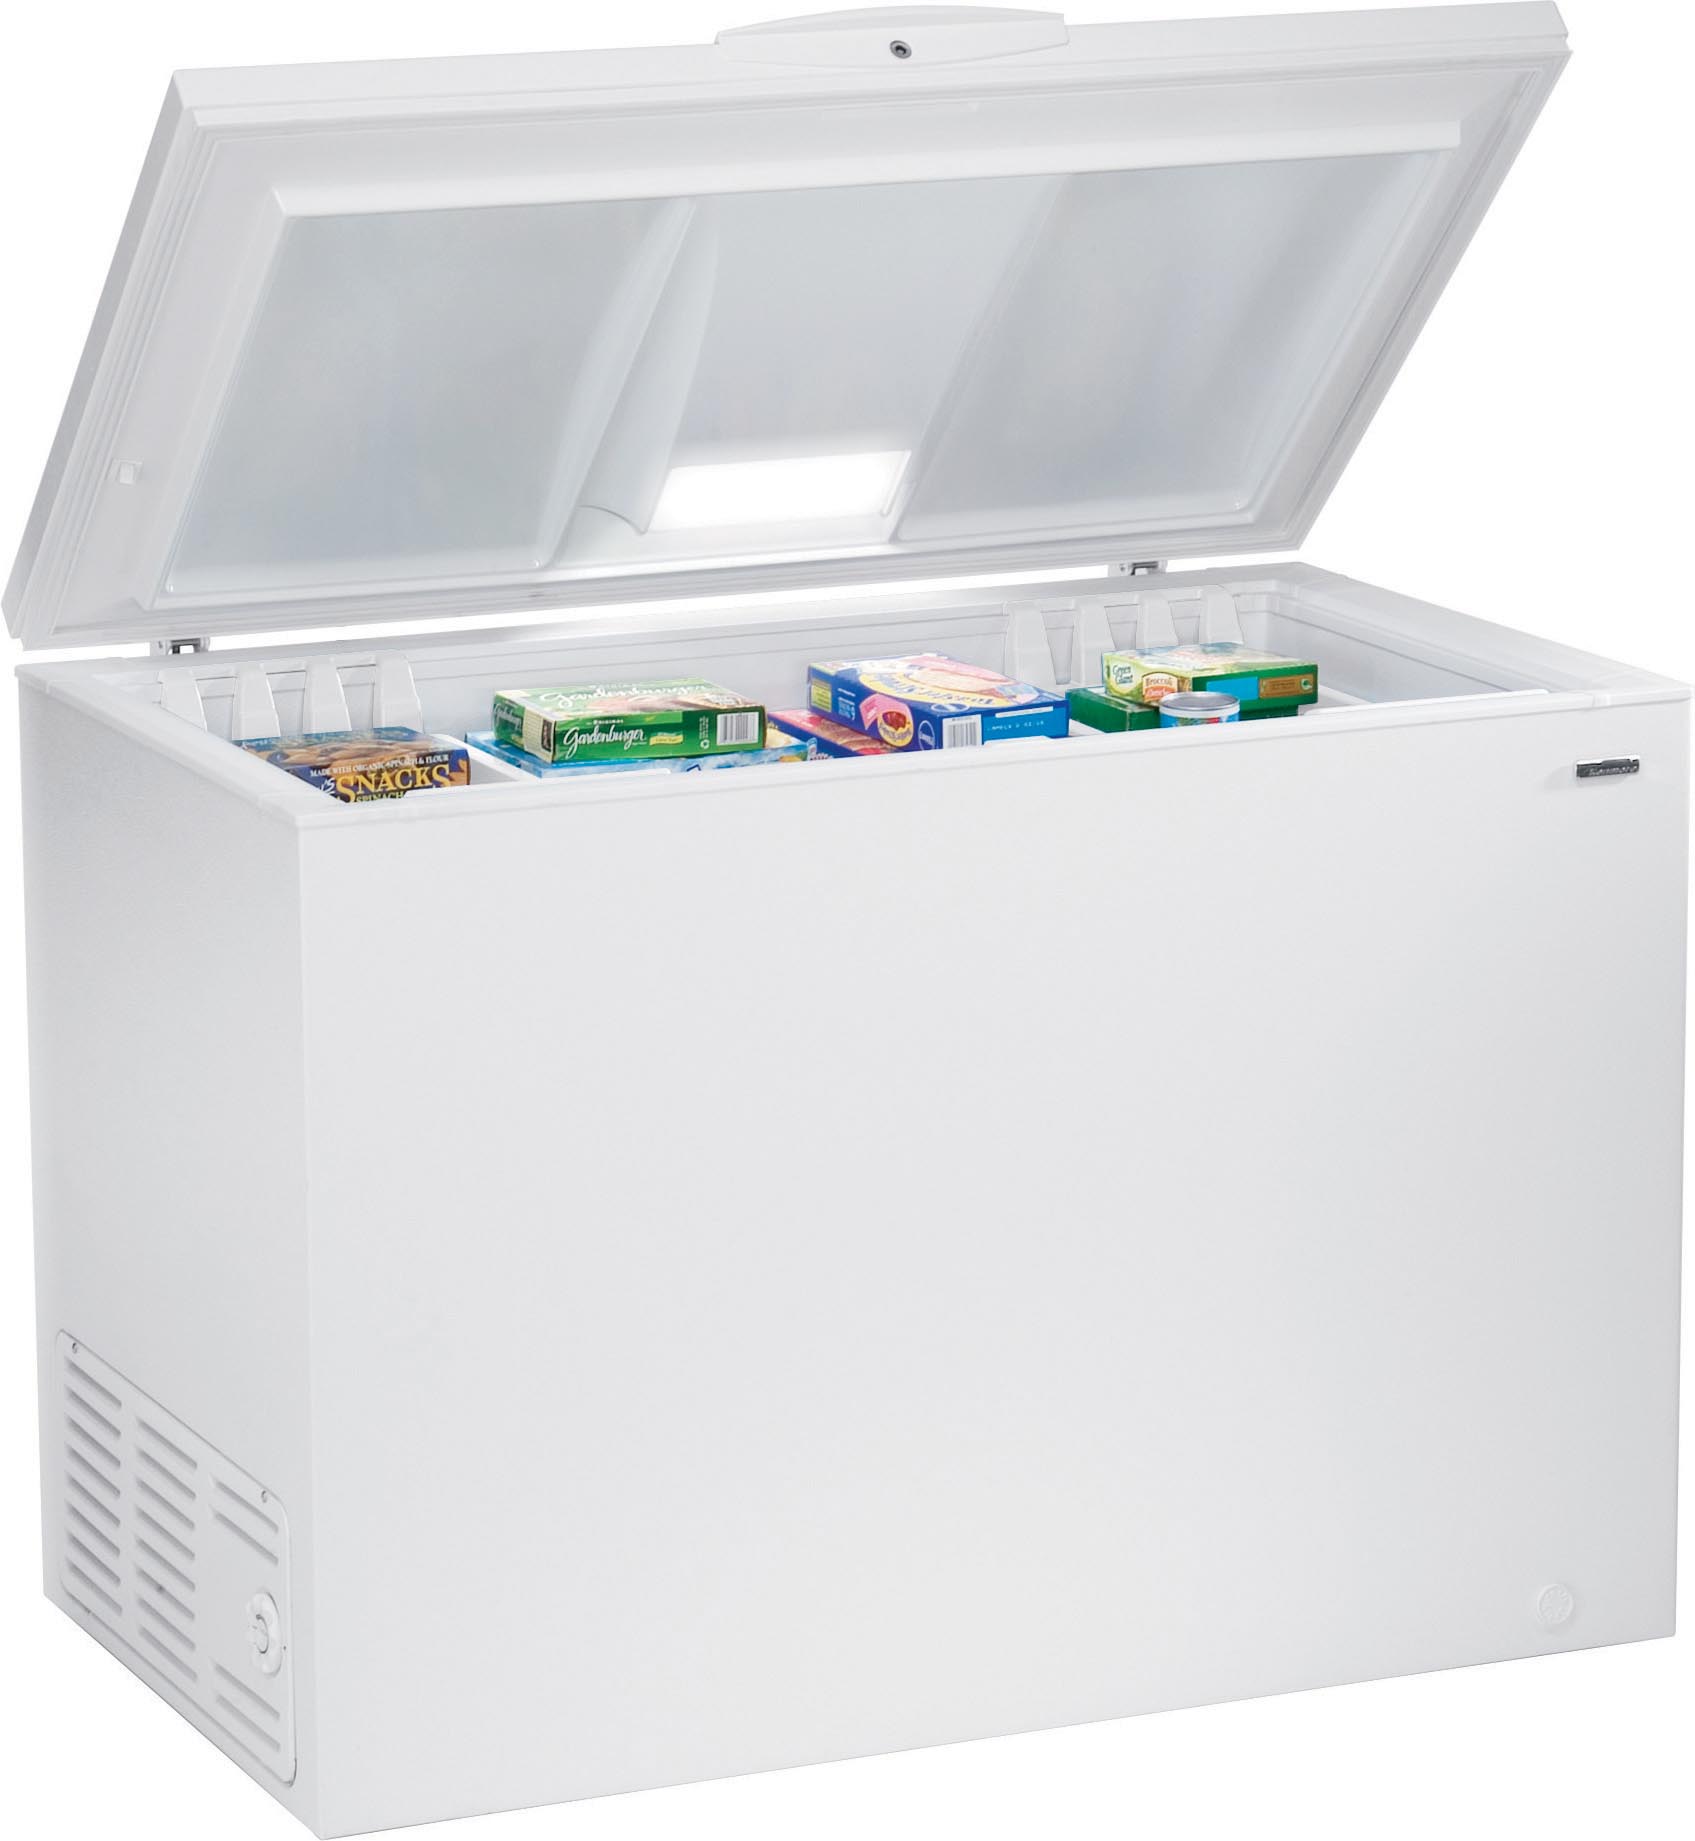 Kenmore 14.8 cu. ft. Chest Freezer (1654) White